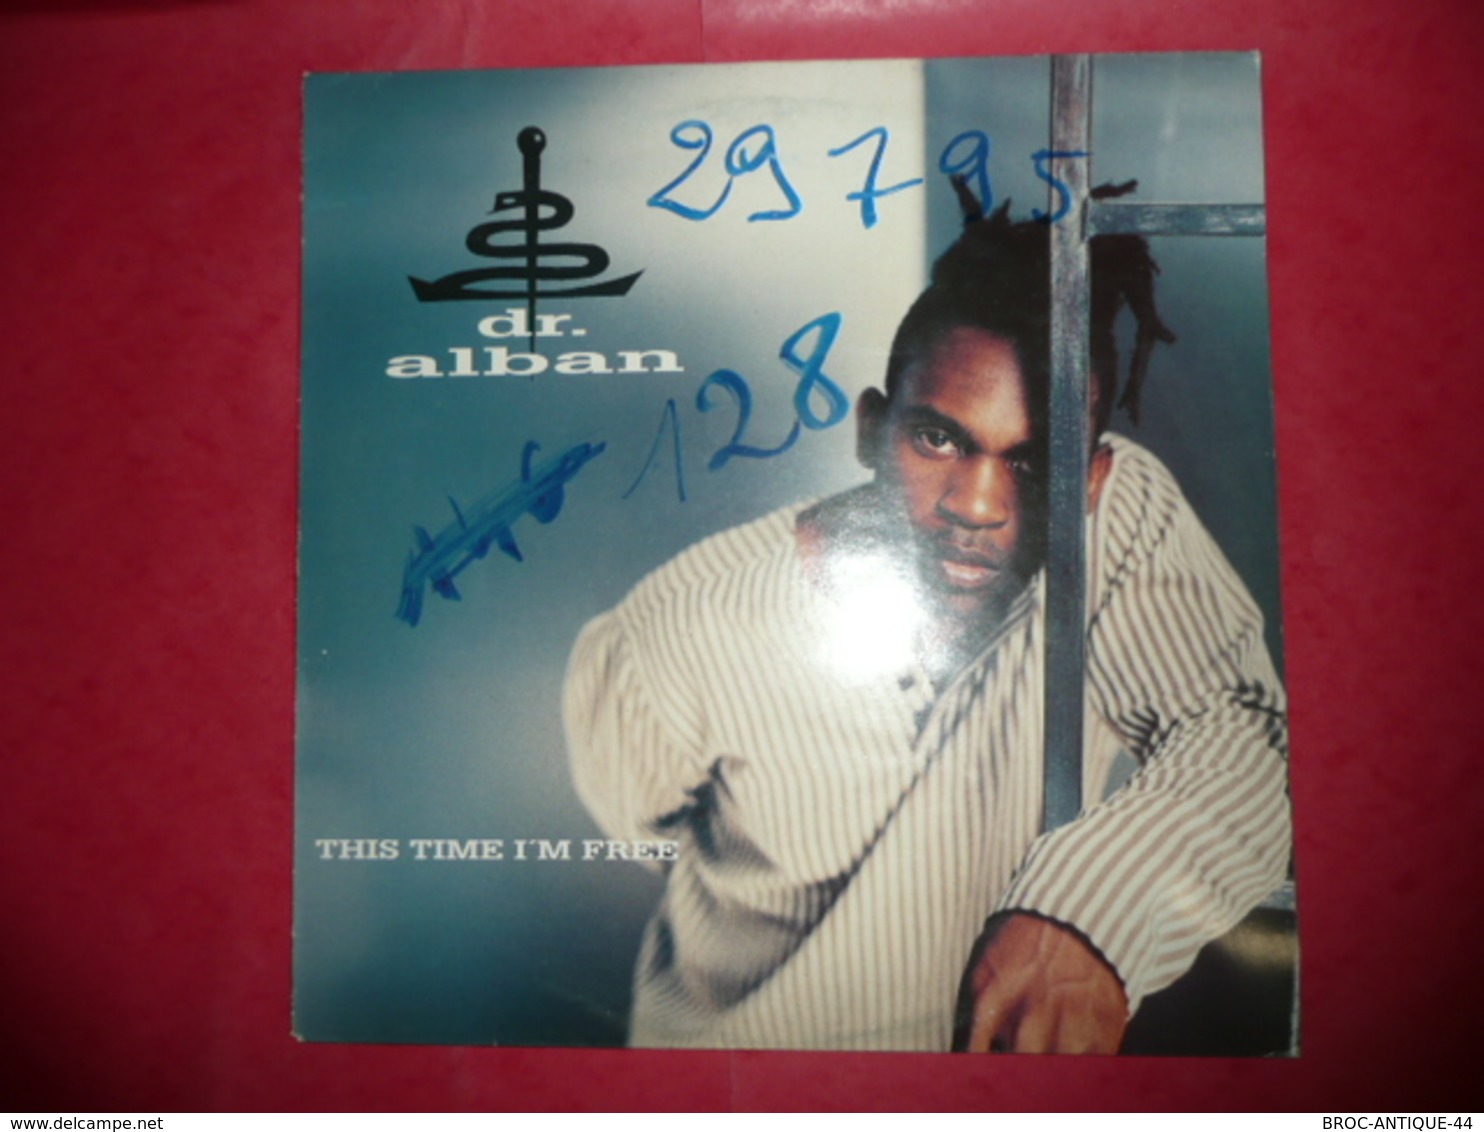 LP N°1820 - Dr. ALBAN - THIS TIME I'M FREE - COMPILATION 4 TITRES ELECTRO HOUSE - 45 Toeren - Maxi-Single